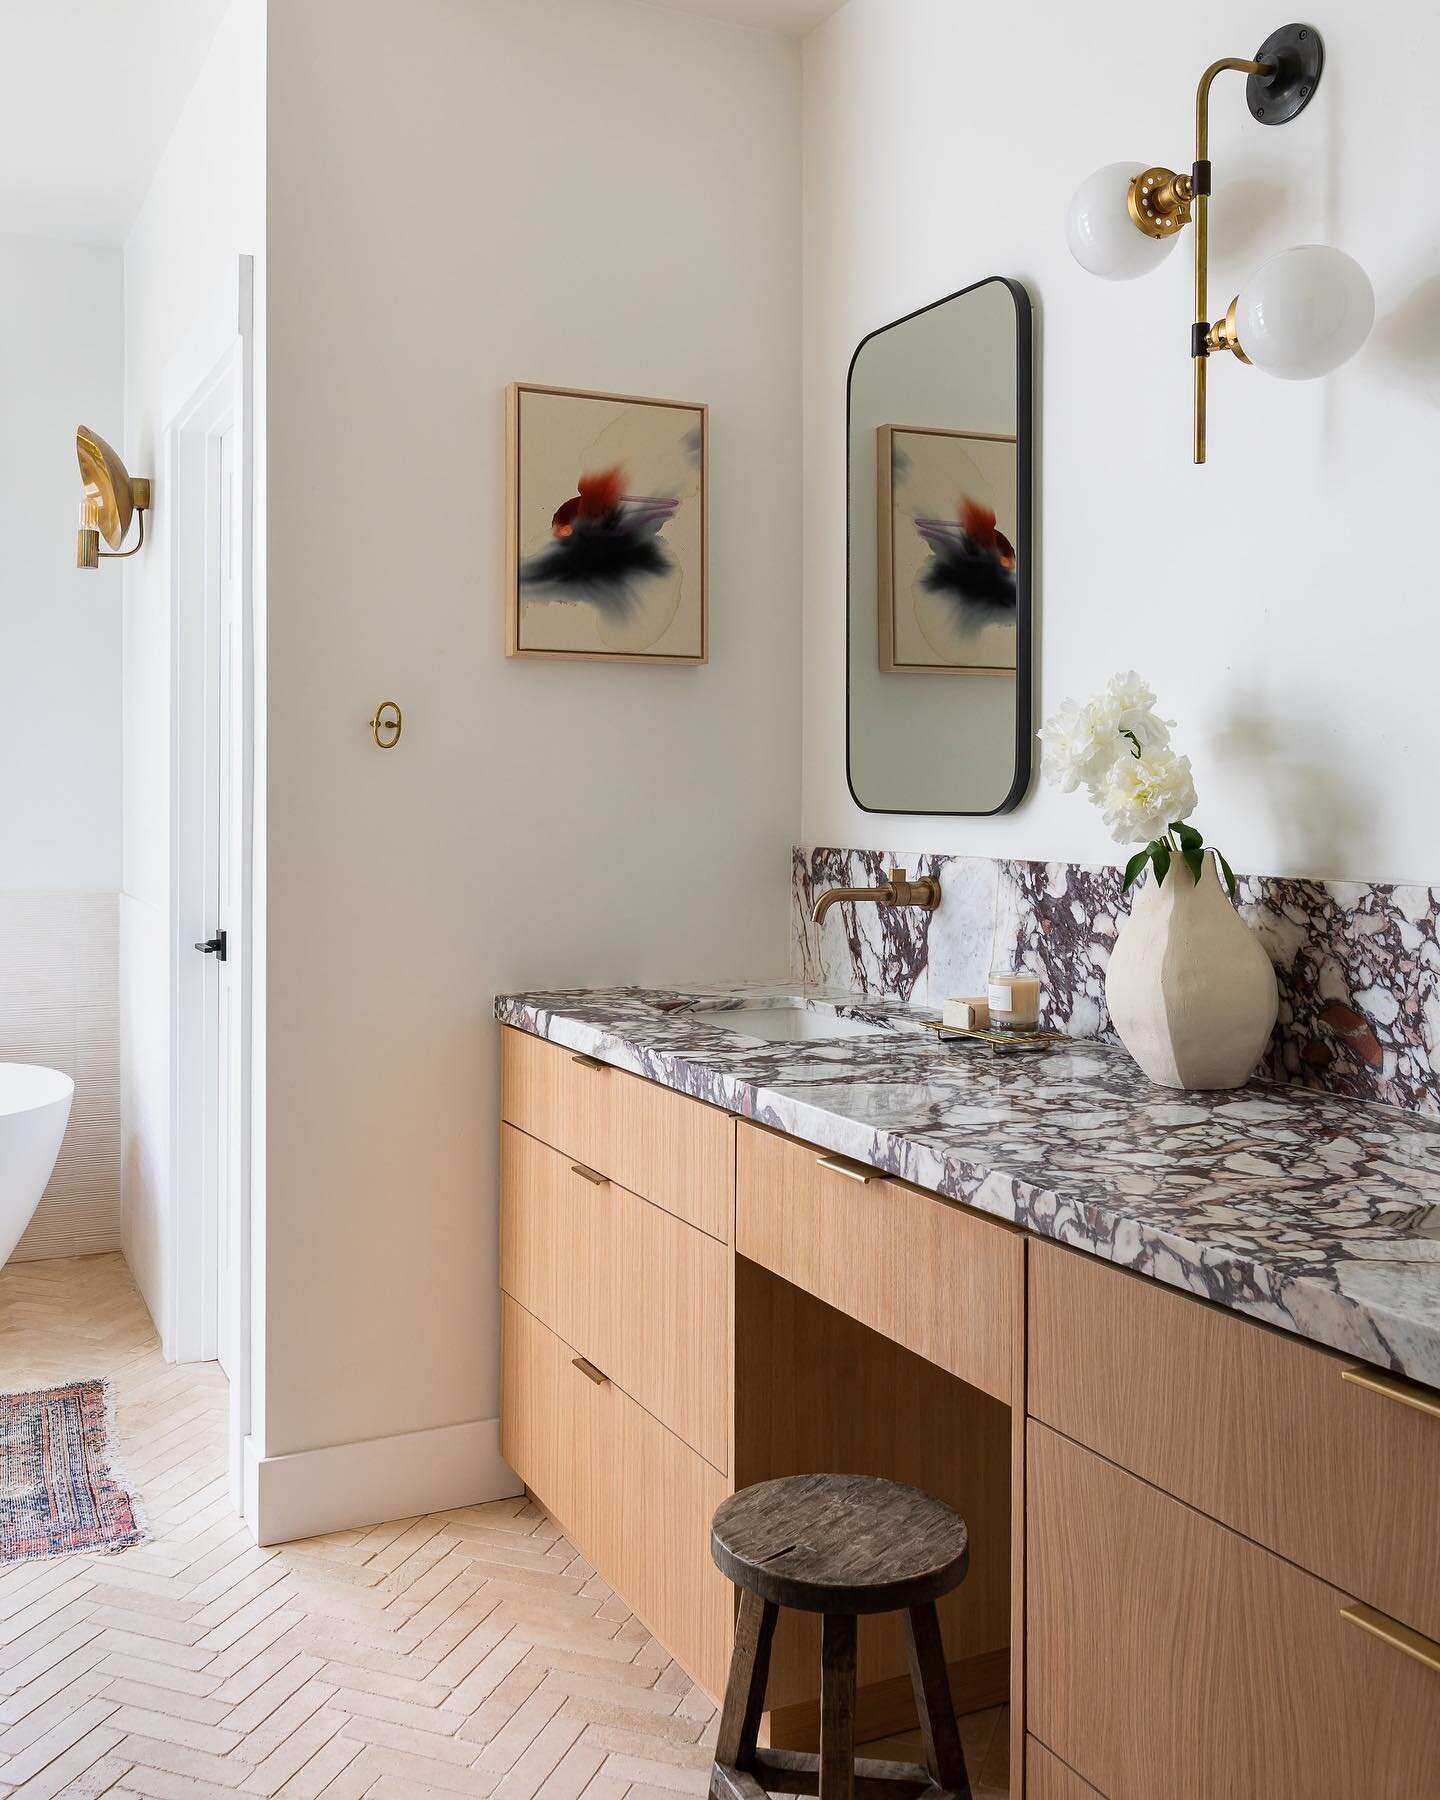 New work! 

We designed a luxurious bathroom rich in materiality, vintages touches and just the right amount of contrast for my friend and favorite artist, @karinabania. Photography by the talented, @laurelwoodcreative